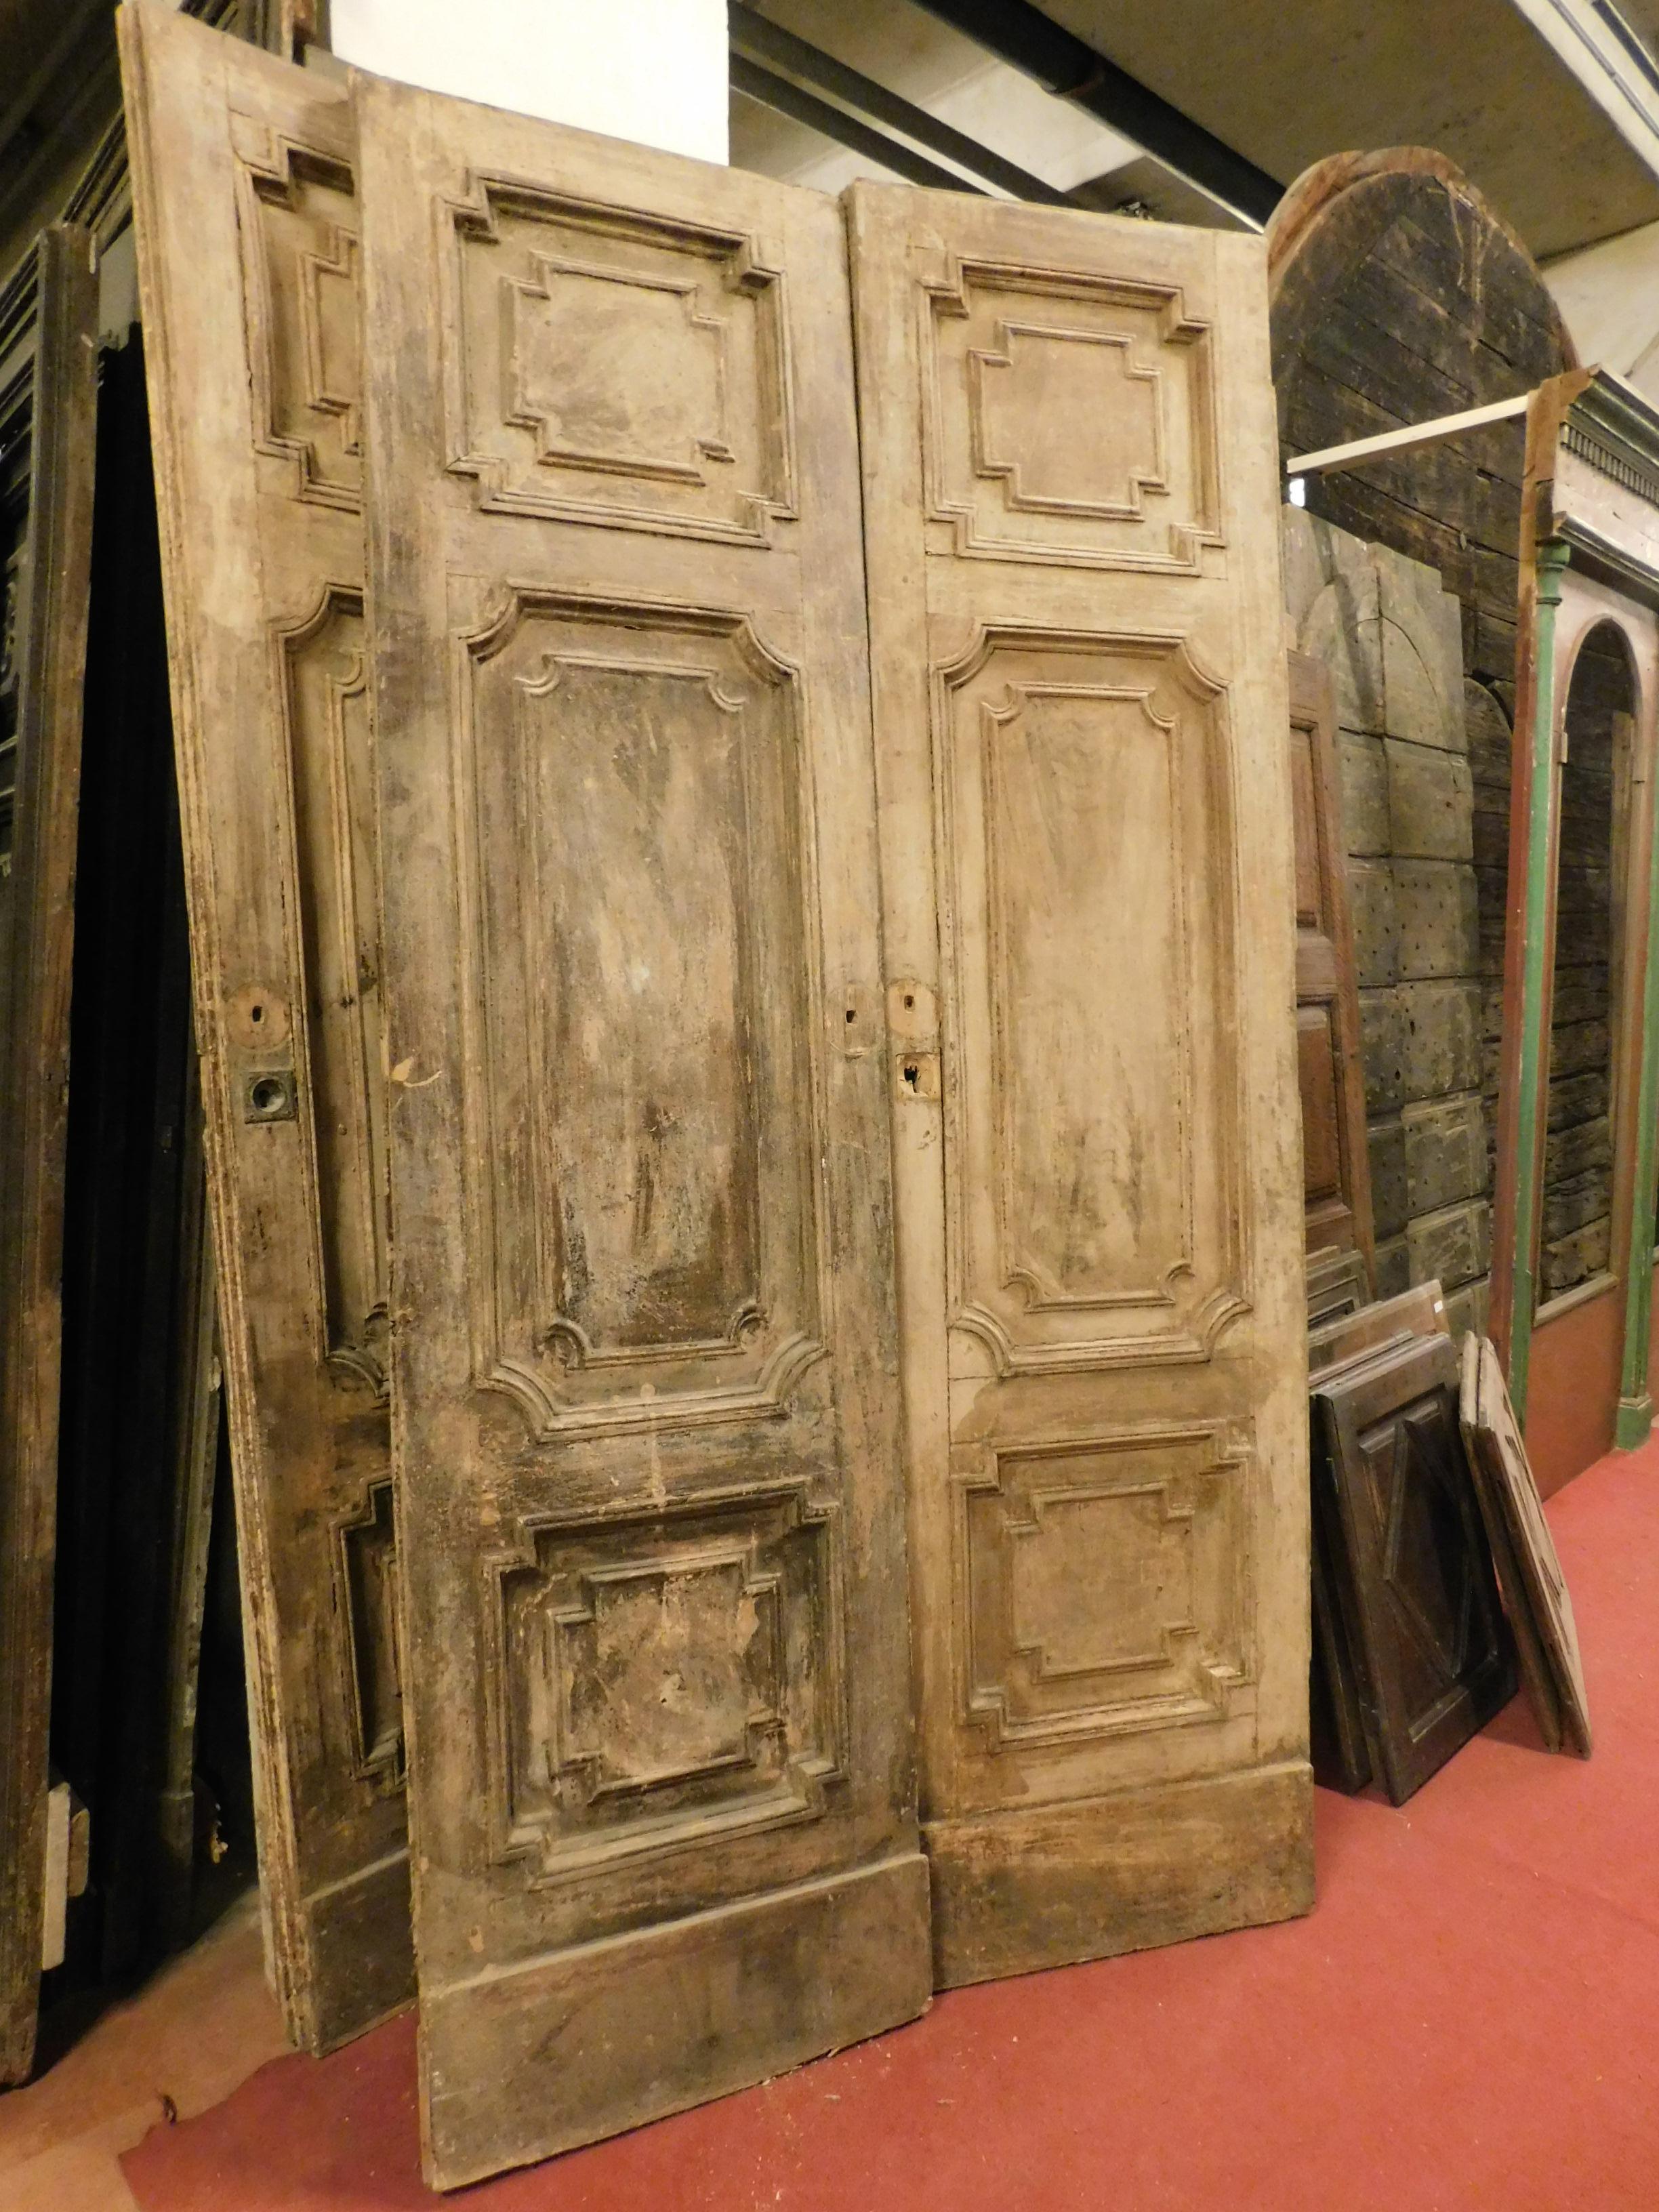 Antique double doors in light fir wood, light honey colored, can be lacquered as they have been stripped, hand carved in Louis XVI style, Italy, 1700.
Beautiful pair of double doors, suitable in a luxury or super modern living room with contrasting